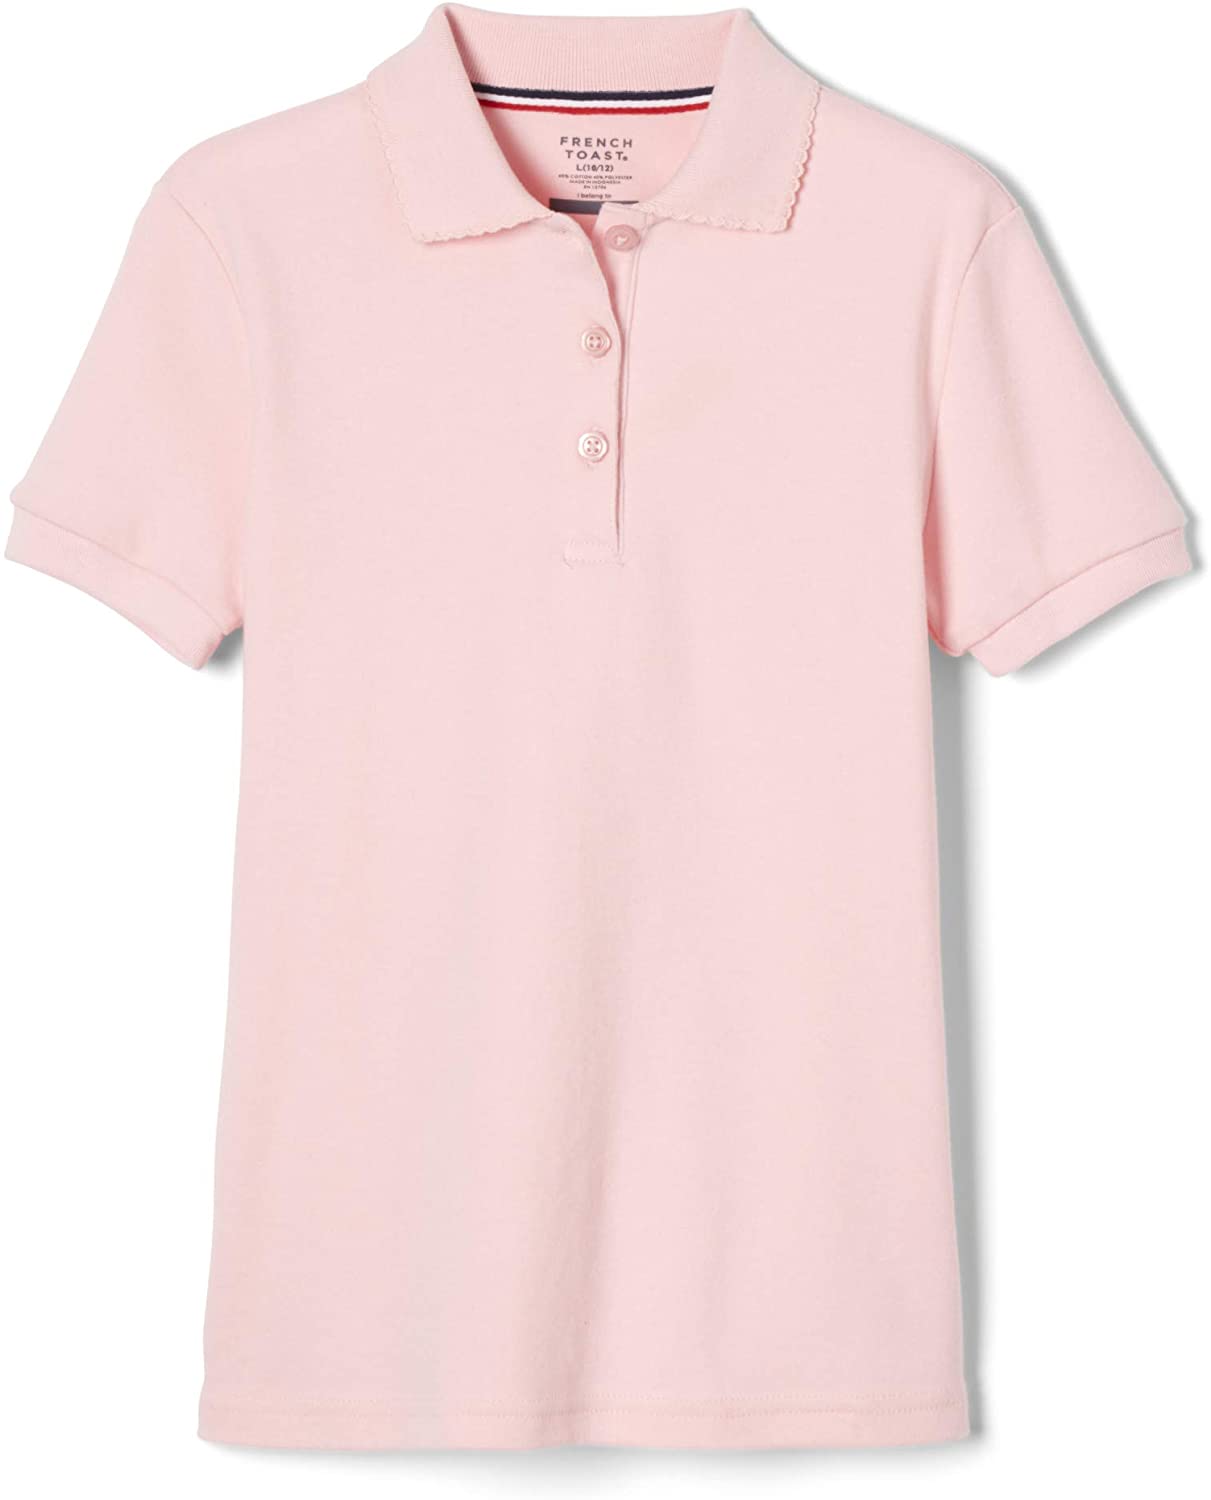 Standard & Plus French Toast Girls' Short Sleeve Picot Collar Polo Shirt 